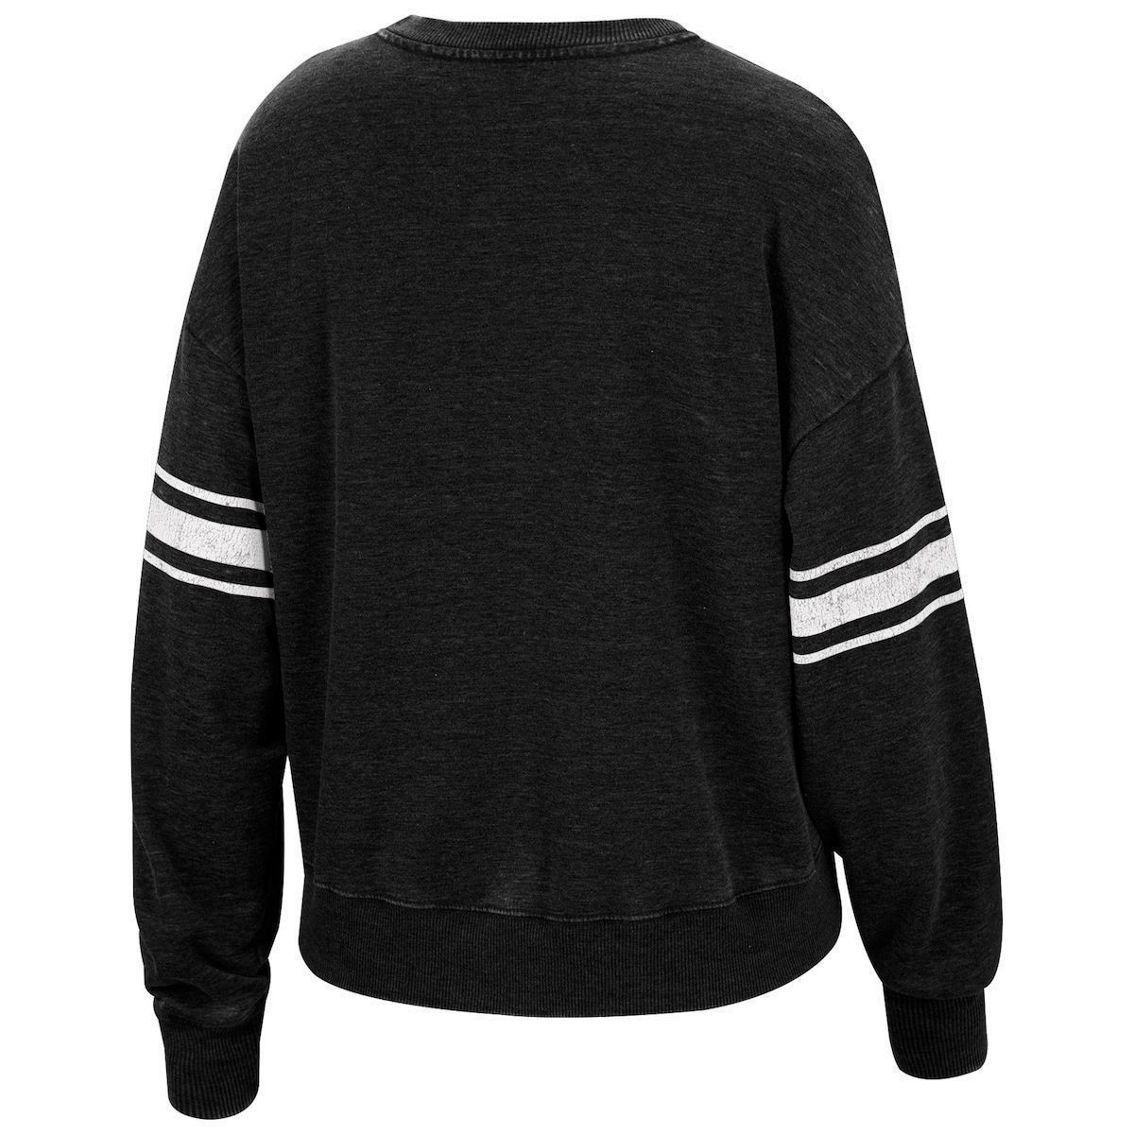 Top of the World Women's Black Oklahoma Sooners Camden Sleeve Stripe Washed Pullover Sweatshirt - Image 4 of 4